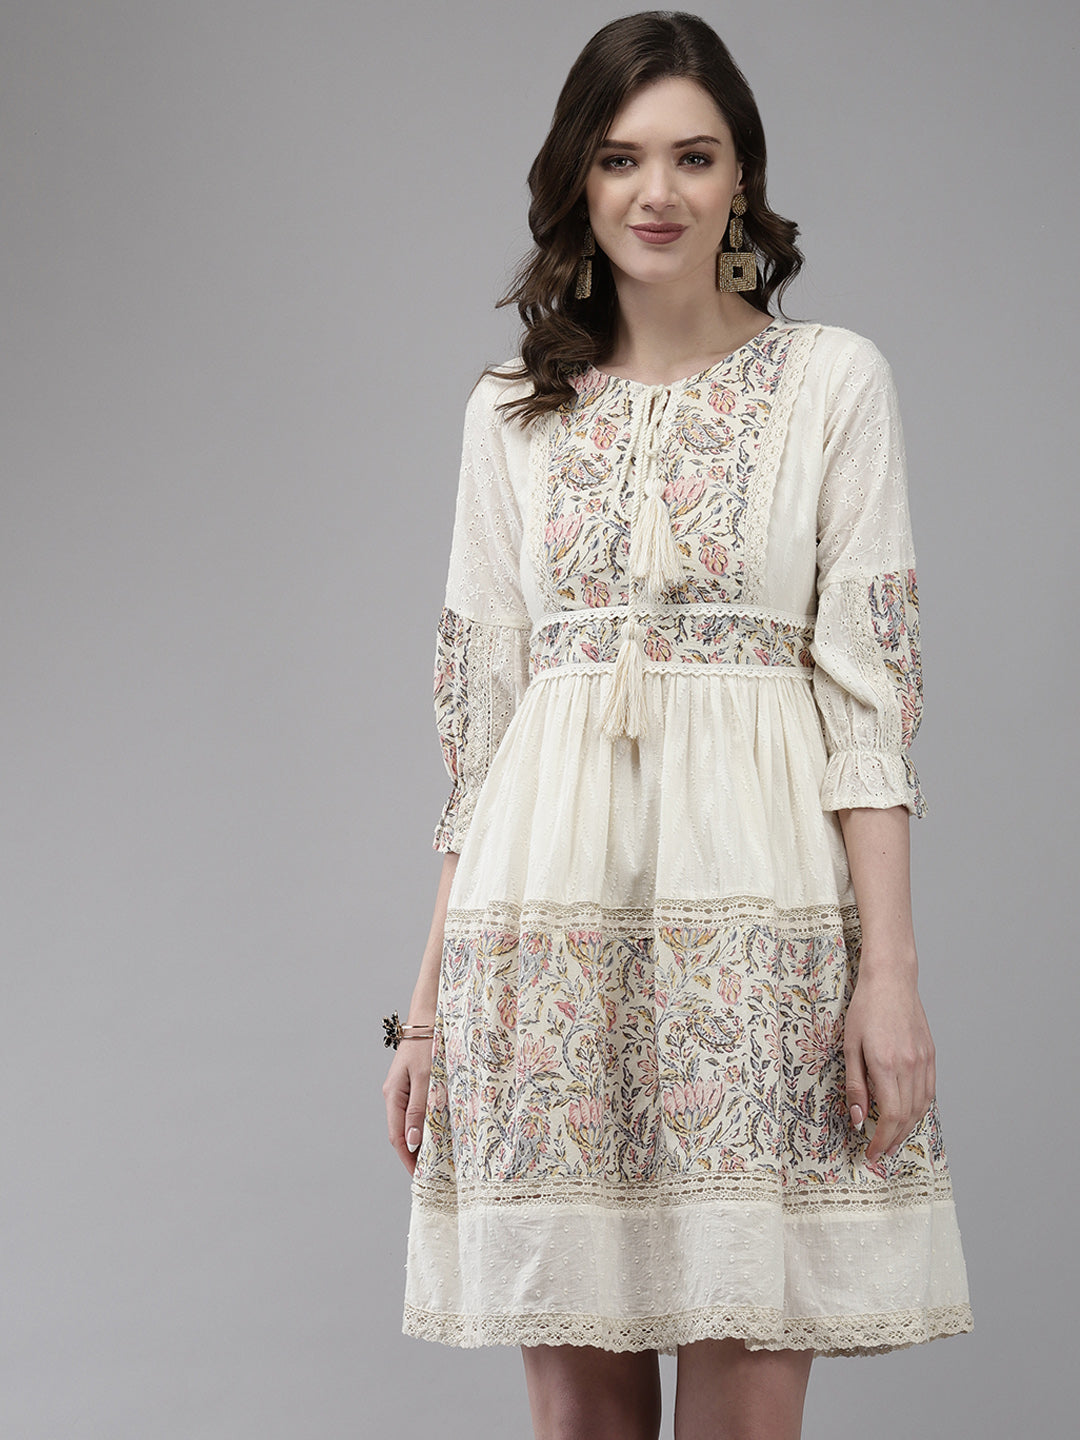 Ishin Women's Cotton Off White Embroidered A-Line Dress